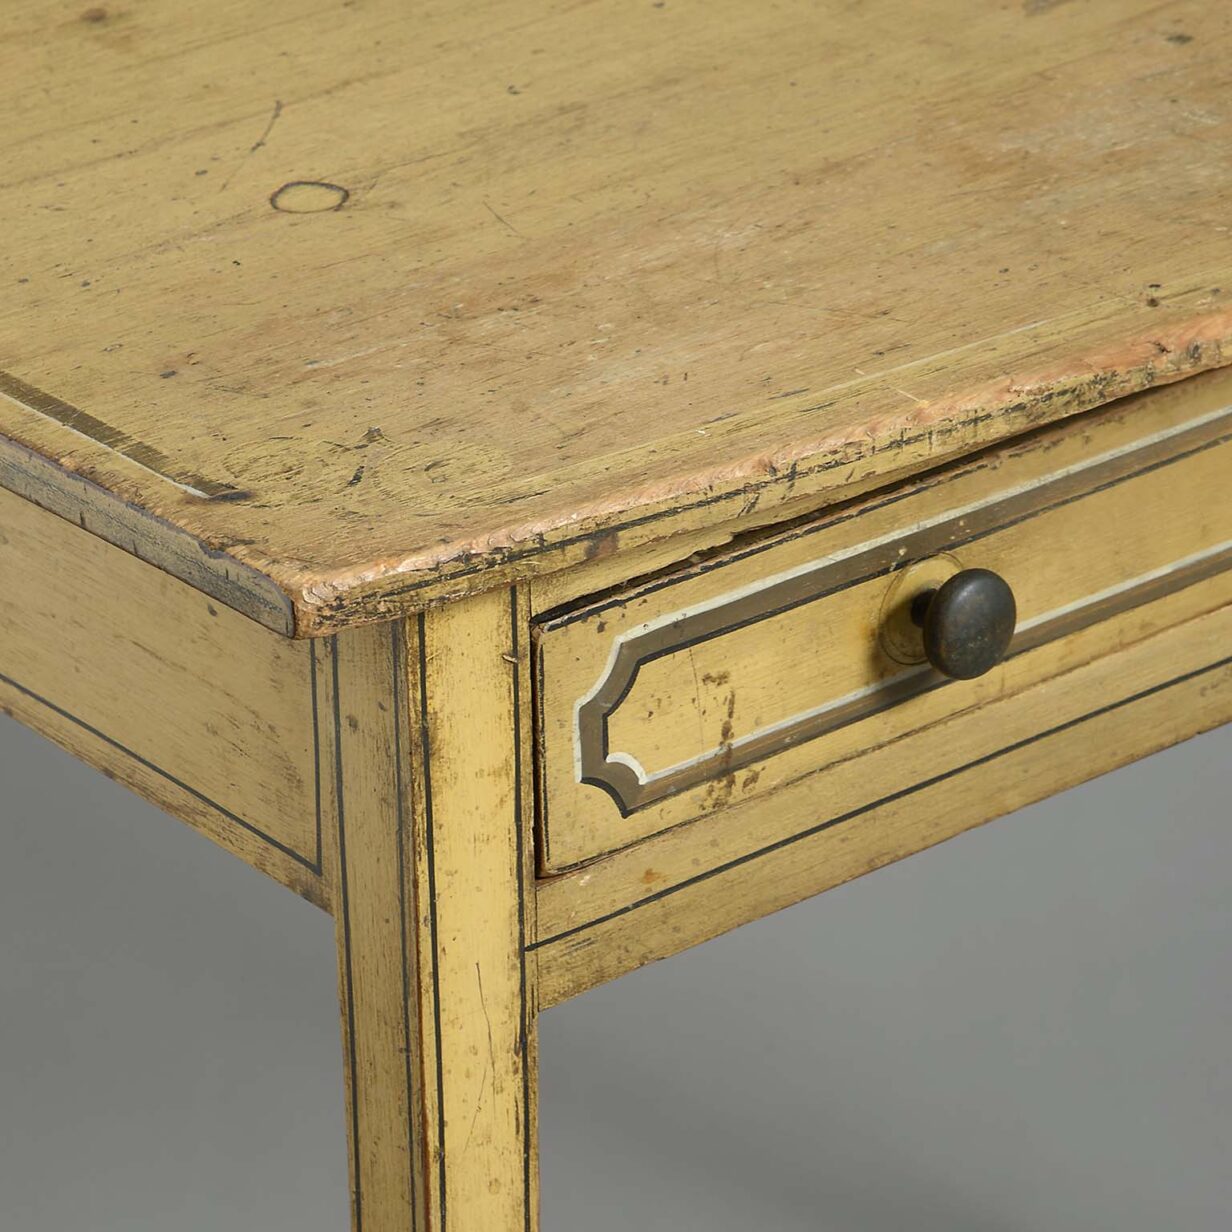 Early 19th century regency period side table